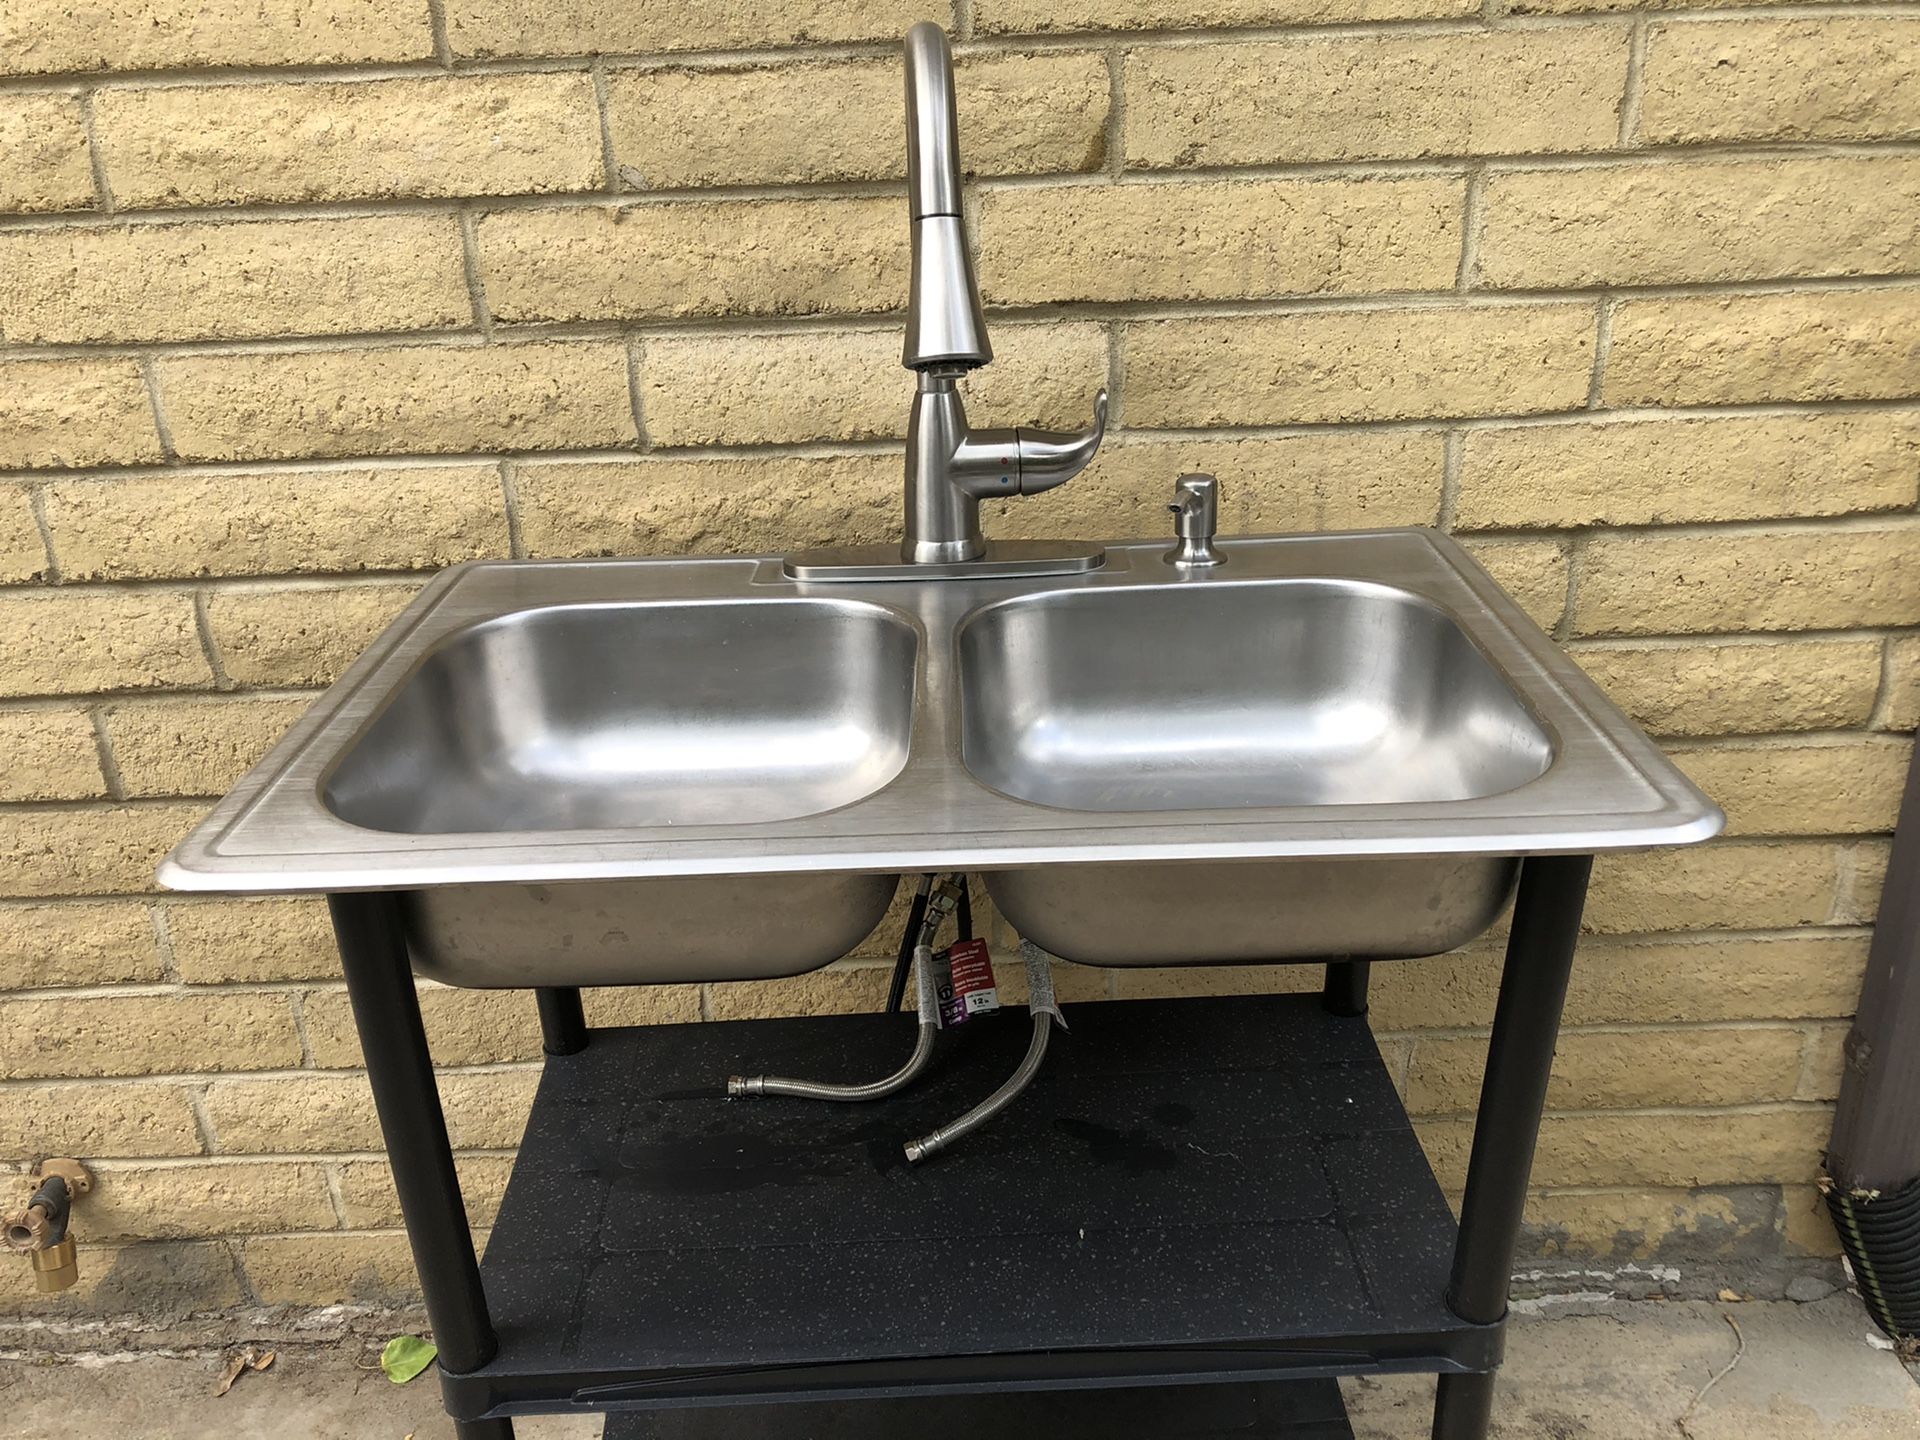 Glacier Bay stainless kitchen sink with faucet